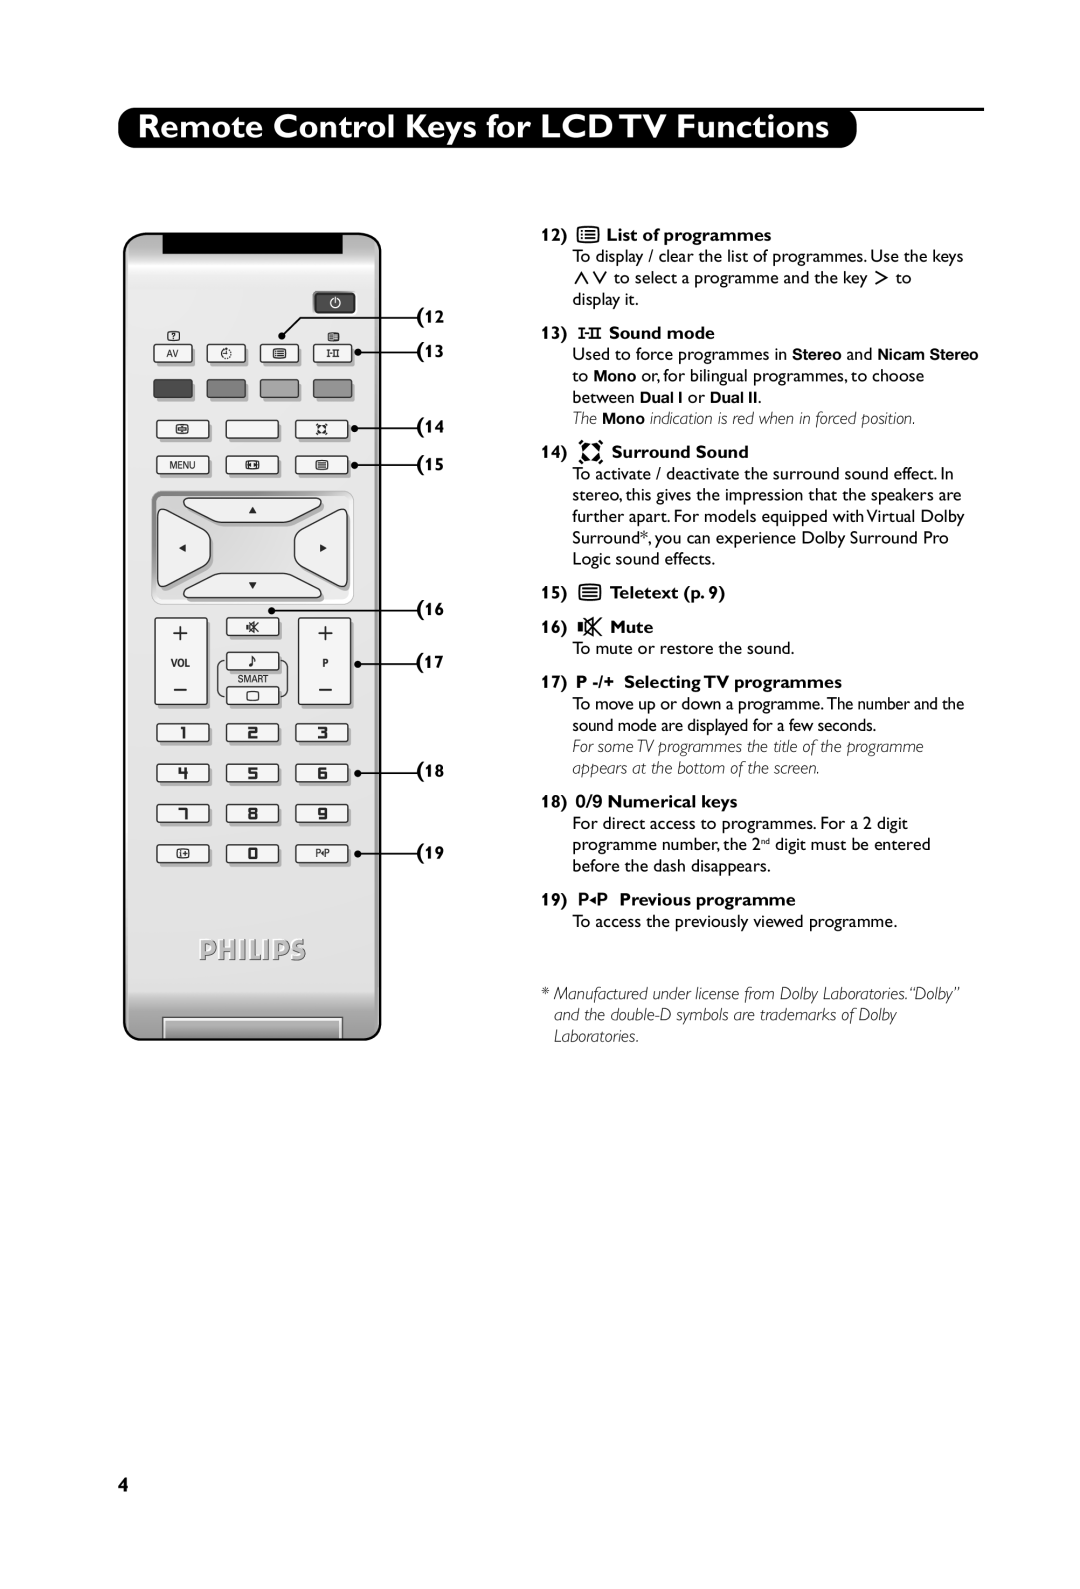 Philips 20PF4121 Remote Control Keys for LCD TV Functions, 12 ı List of programmes, 13 ù Sound mode, Q Surround Sound 